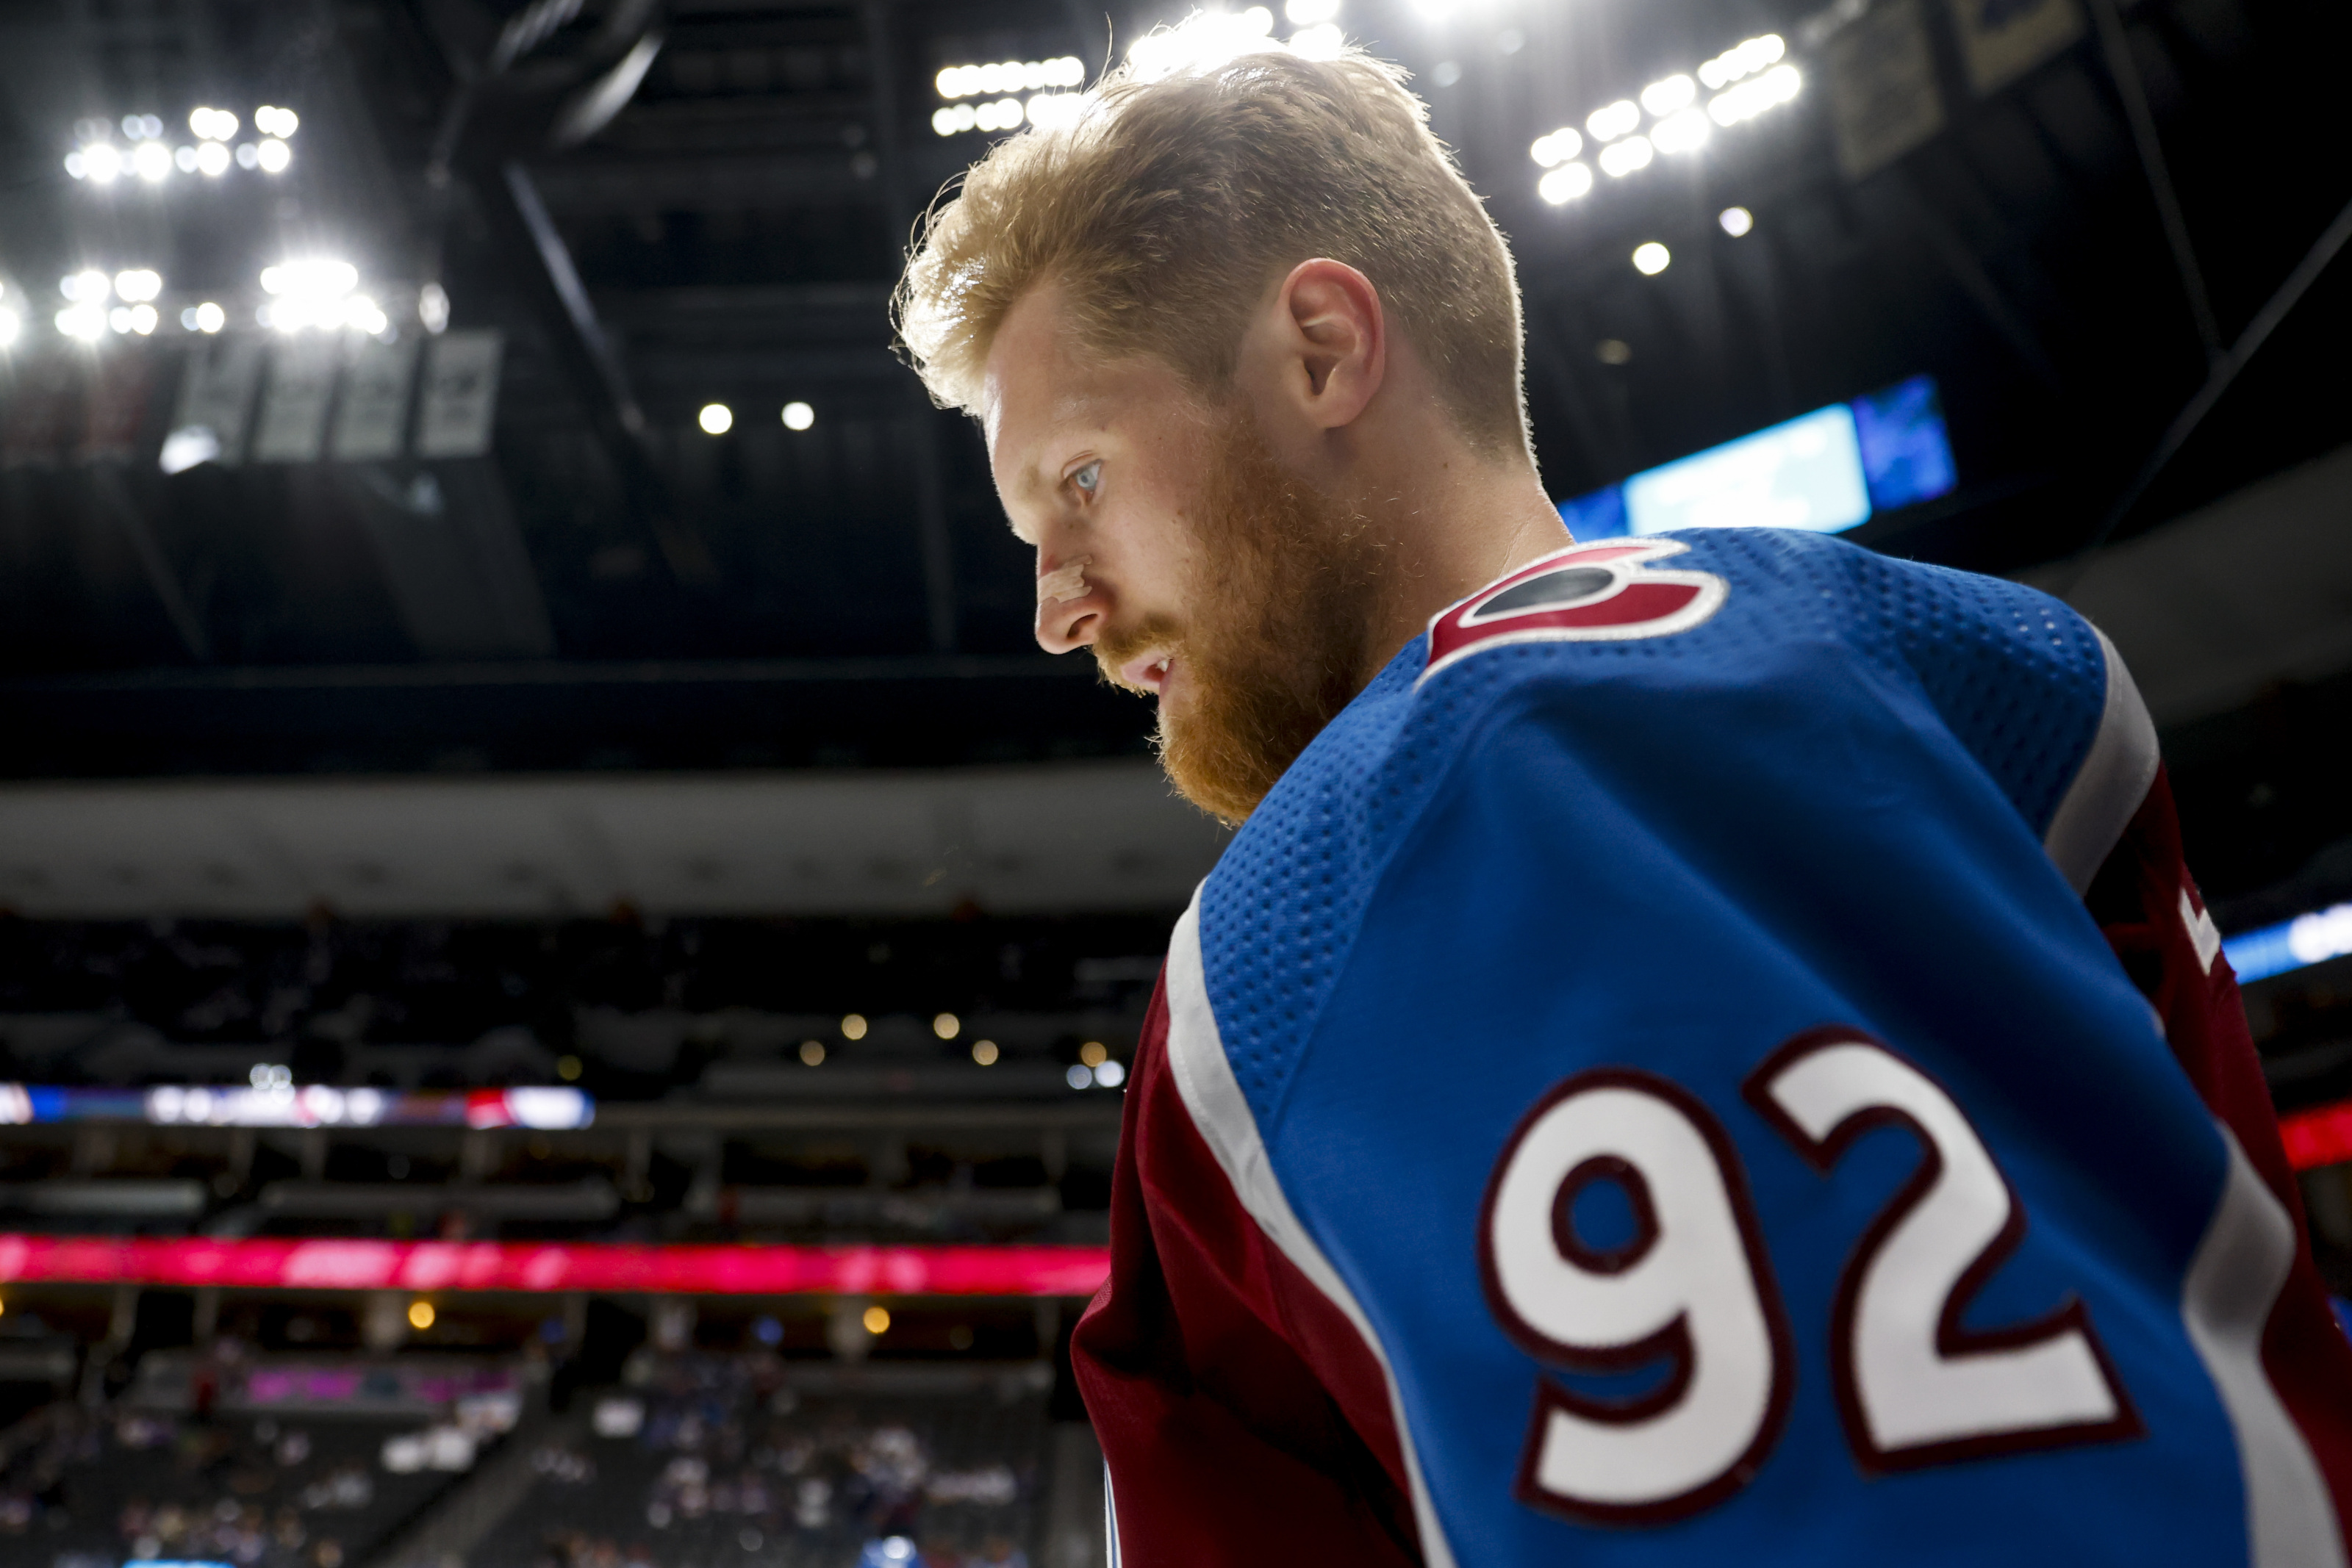 Nathan MacKinnon, Gabe Landeskog believe Avalanche's Stanley Cup chances  better than ever